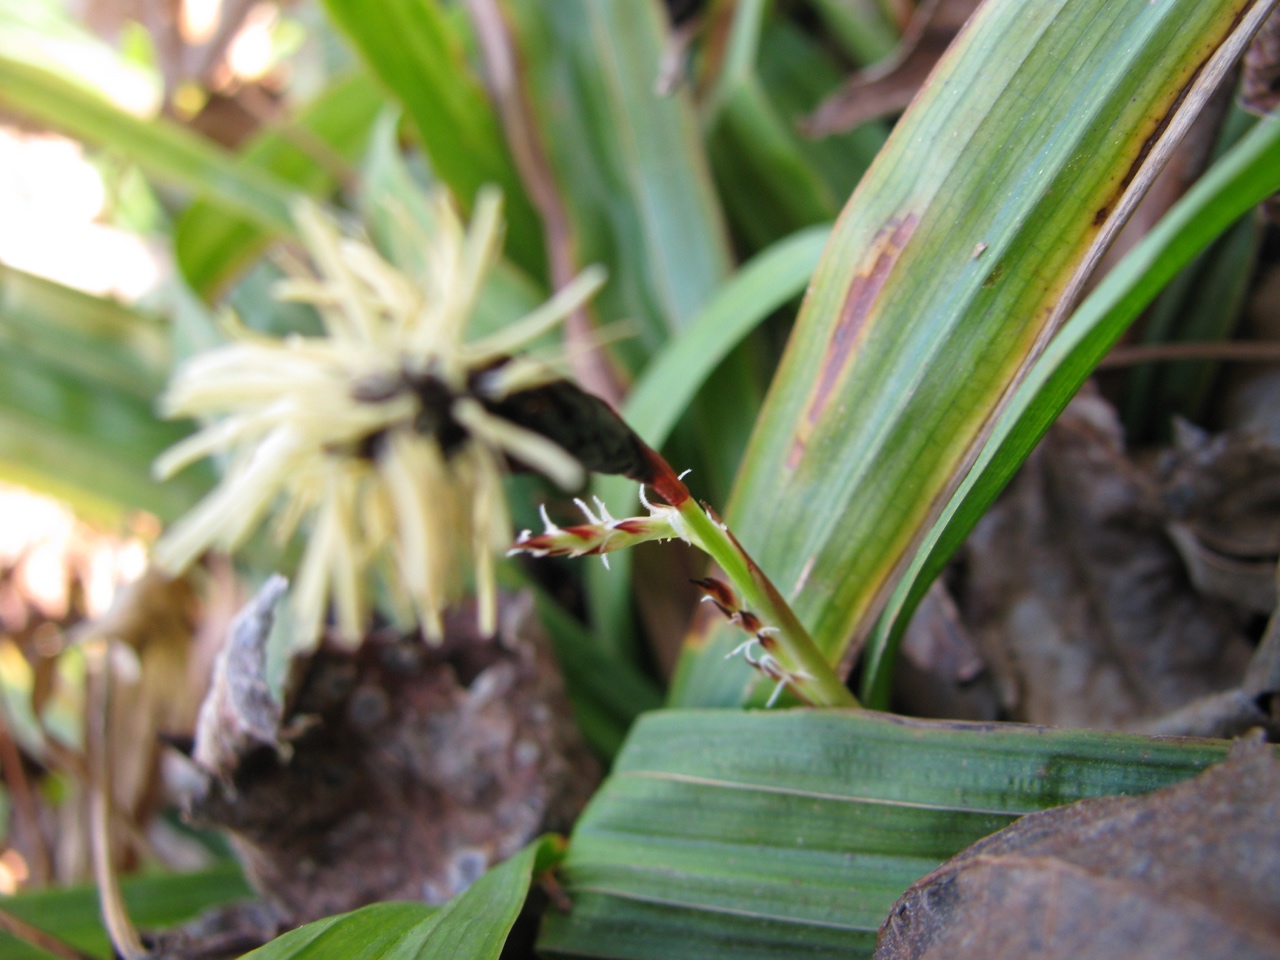 The Scientific Name is Carex plantaginea. You will likely hear them called Plantain-leaved Sedge, Seersucker Sedge. This picture shows the Female spikelet in February of Carex plantaginea